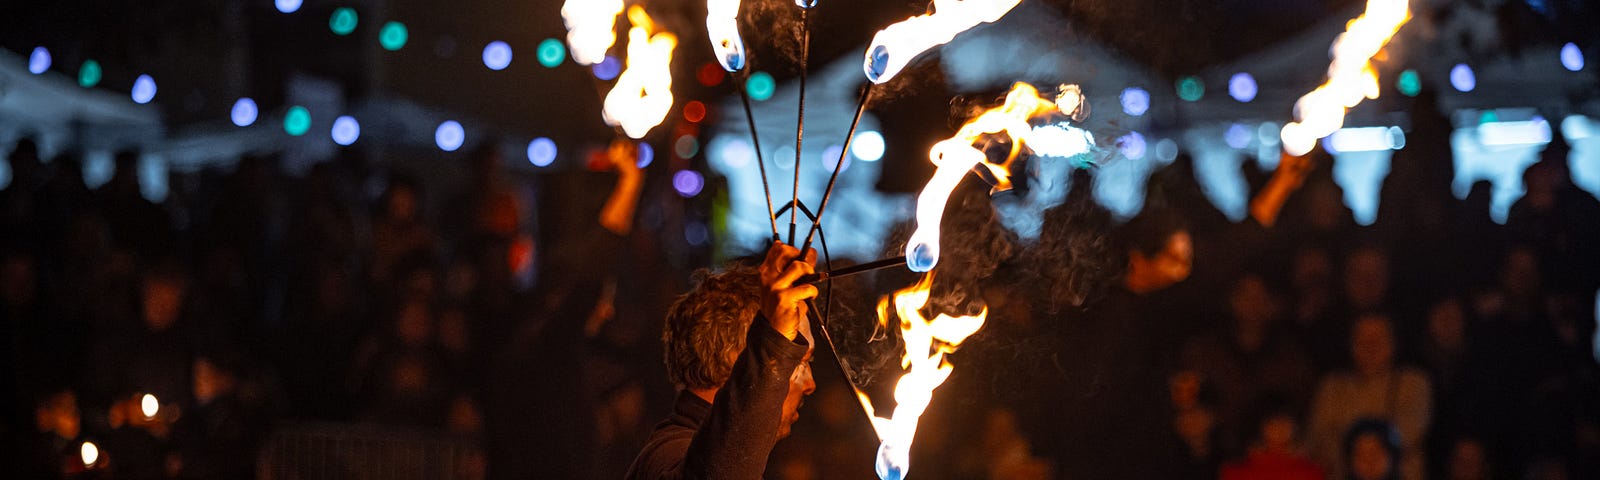 A fire juggler performs at a large outdoor nighttime event.